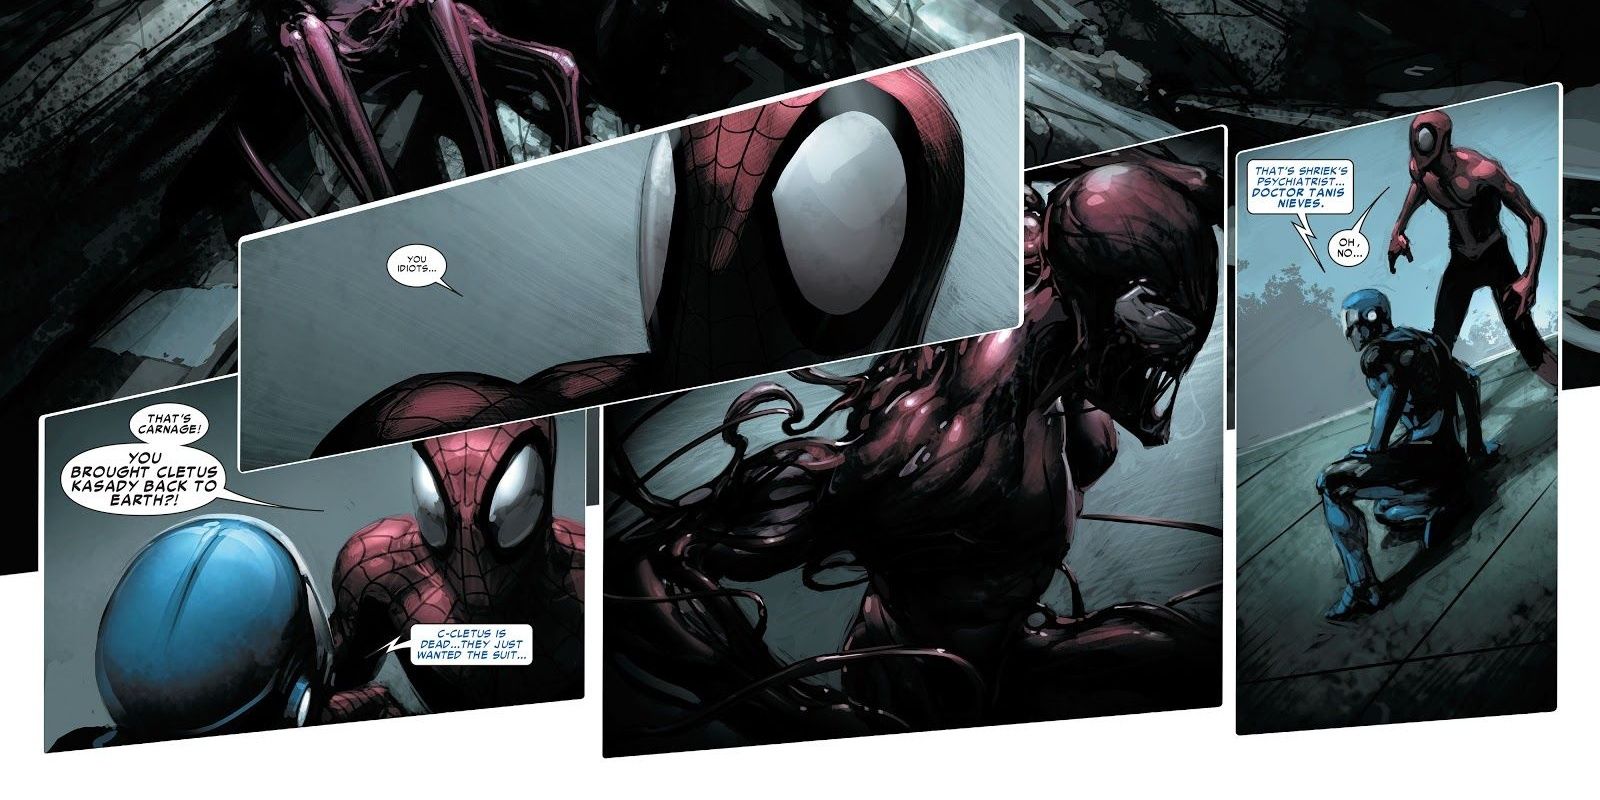 Carnage fights Spider-Man and an Iron Ranger in the comics